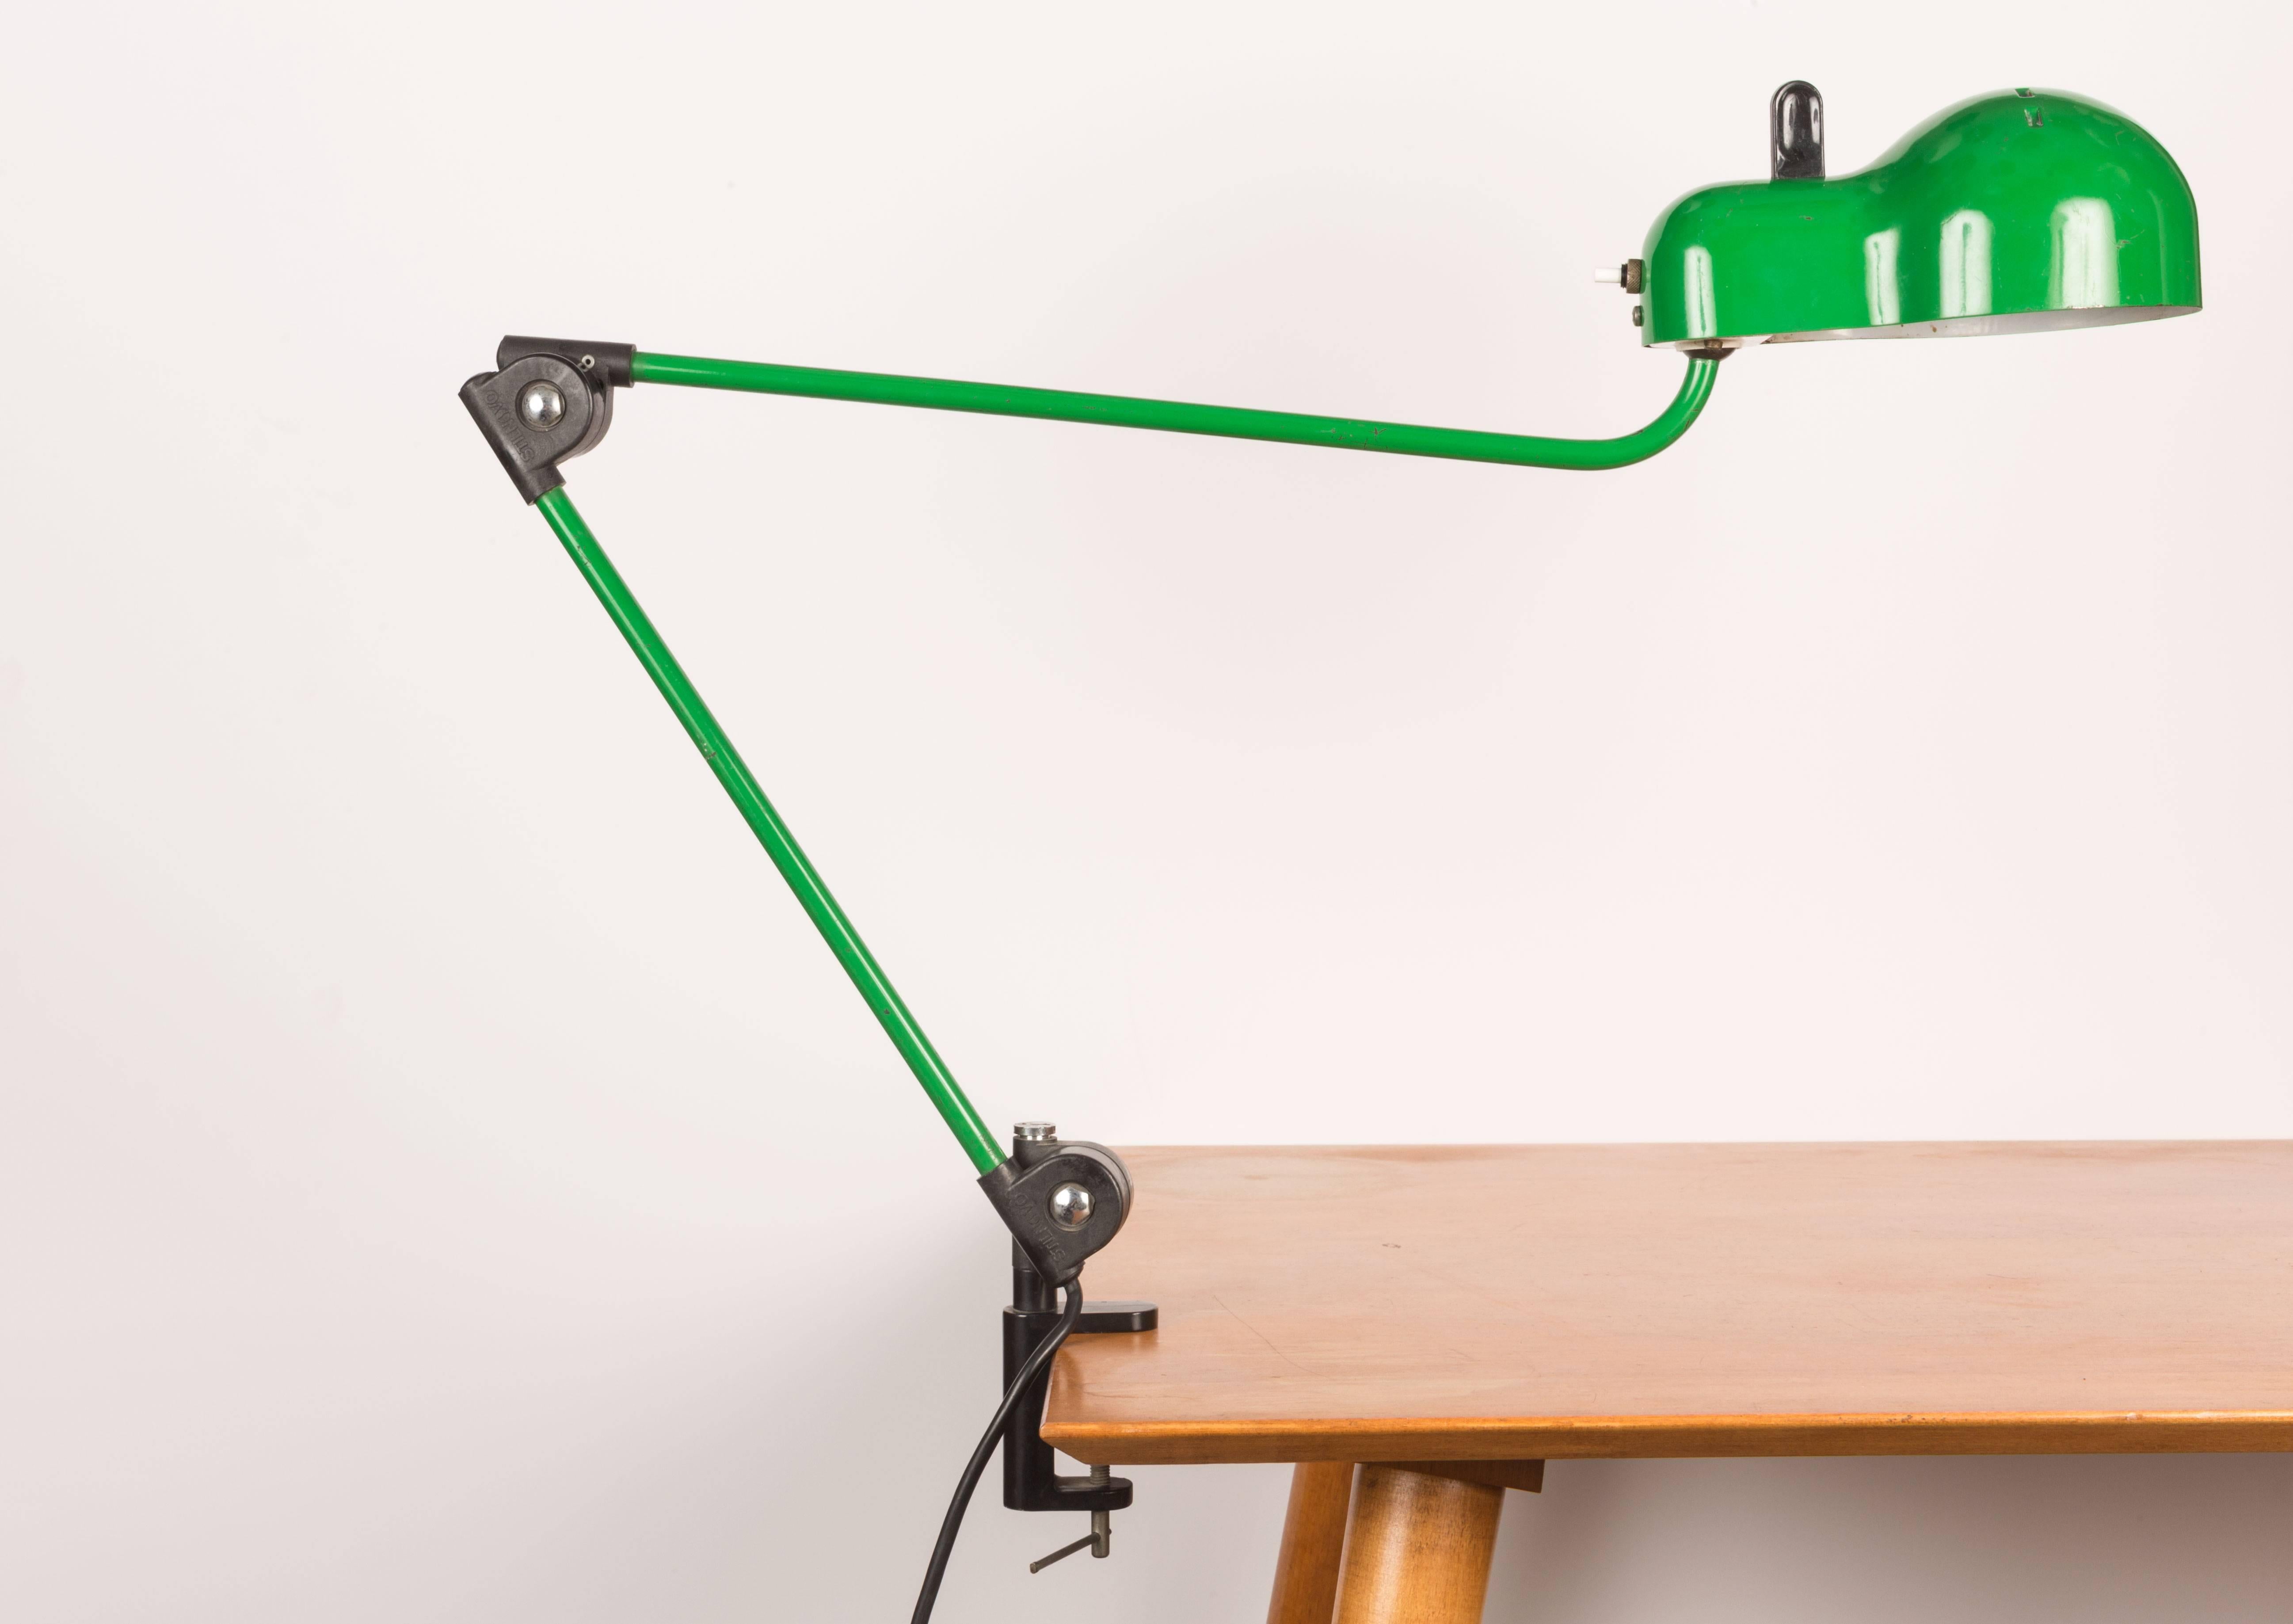 Joe Colombo 'Topo' Task Light for Stilnovo c. 1970s. Executed in green enameled metal and plastic with chrome and black plastic details. Manufacturer's stamp: "Stilnovo"

Extends to 42" max. height. Height as pictured is 20.5"